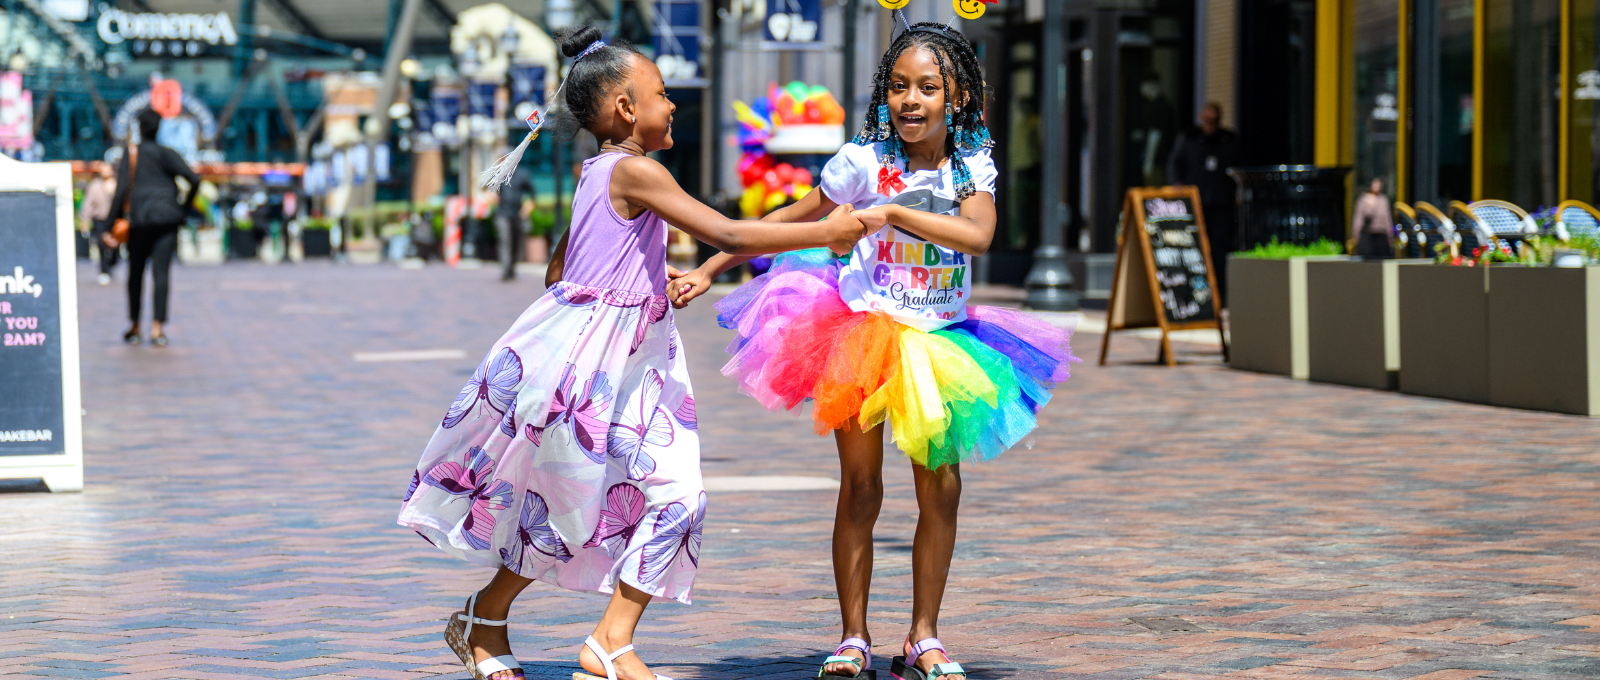 Two young girls dancing in rainbow attire on Columbia Street.